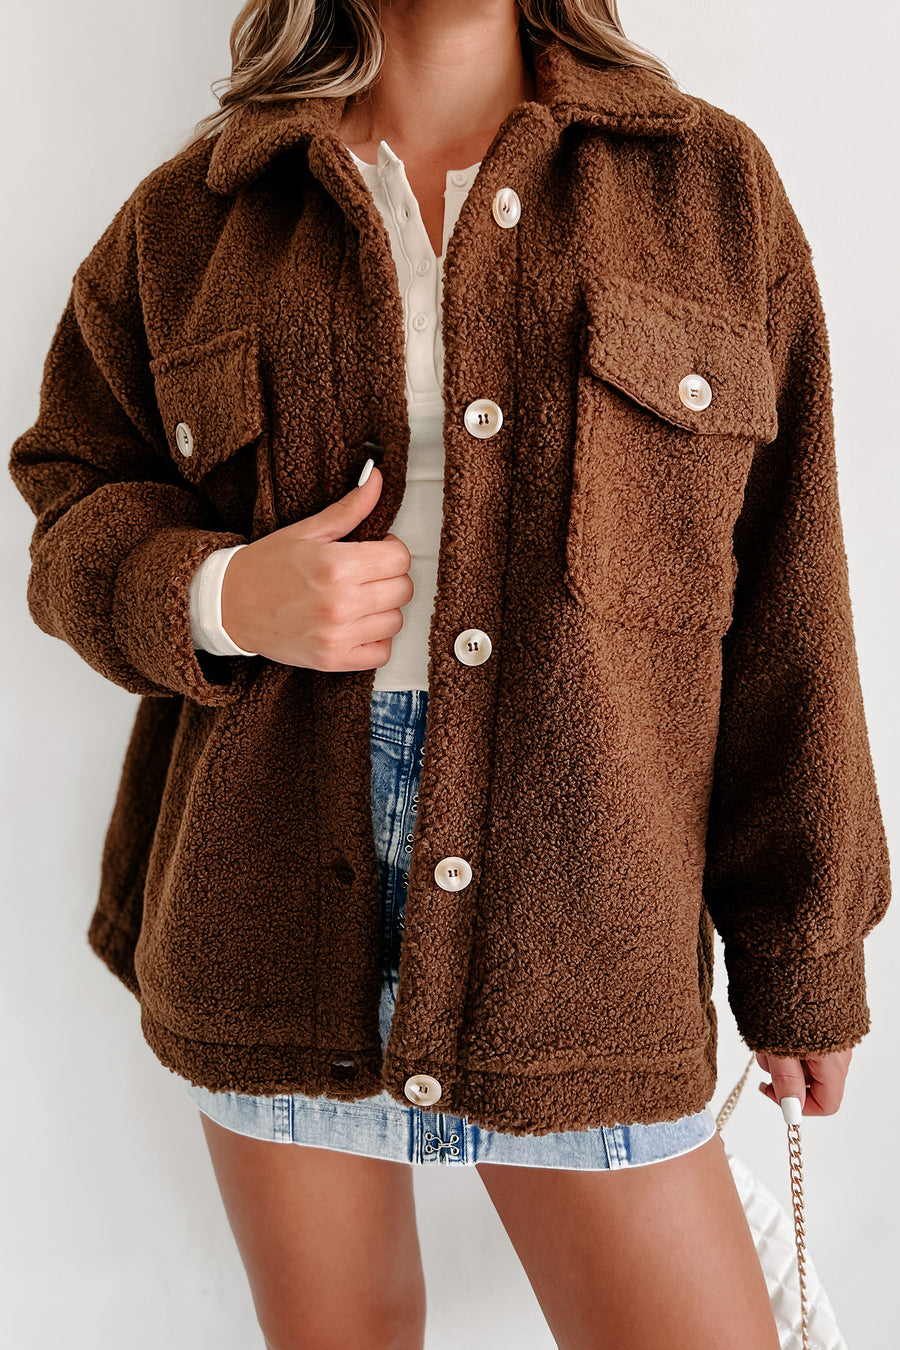 Here's To Today Sherpa Teddy Jacket (Brown) - NanaMacs